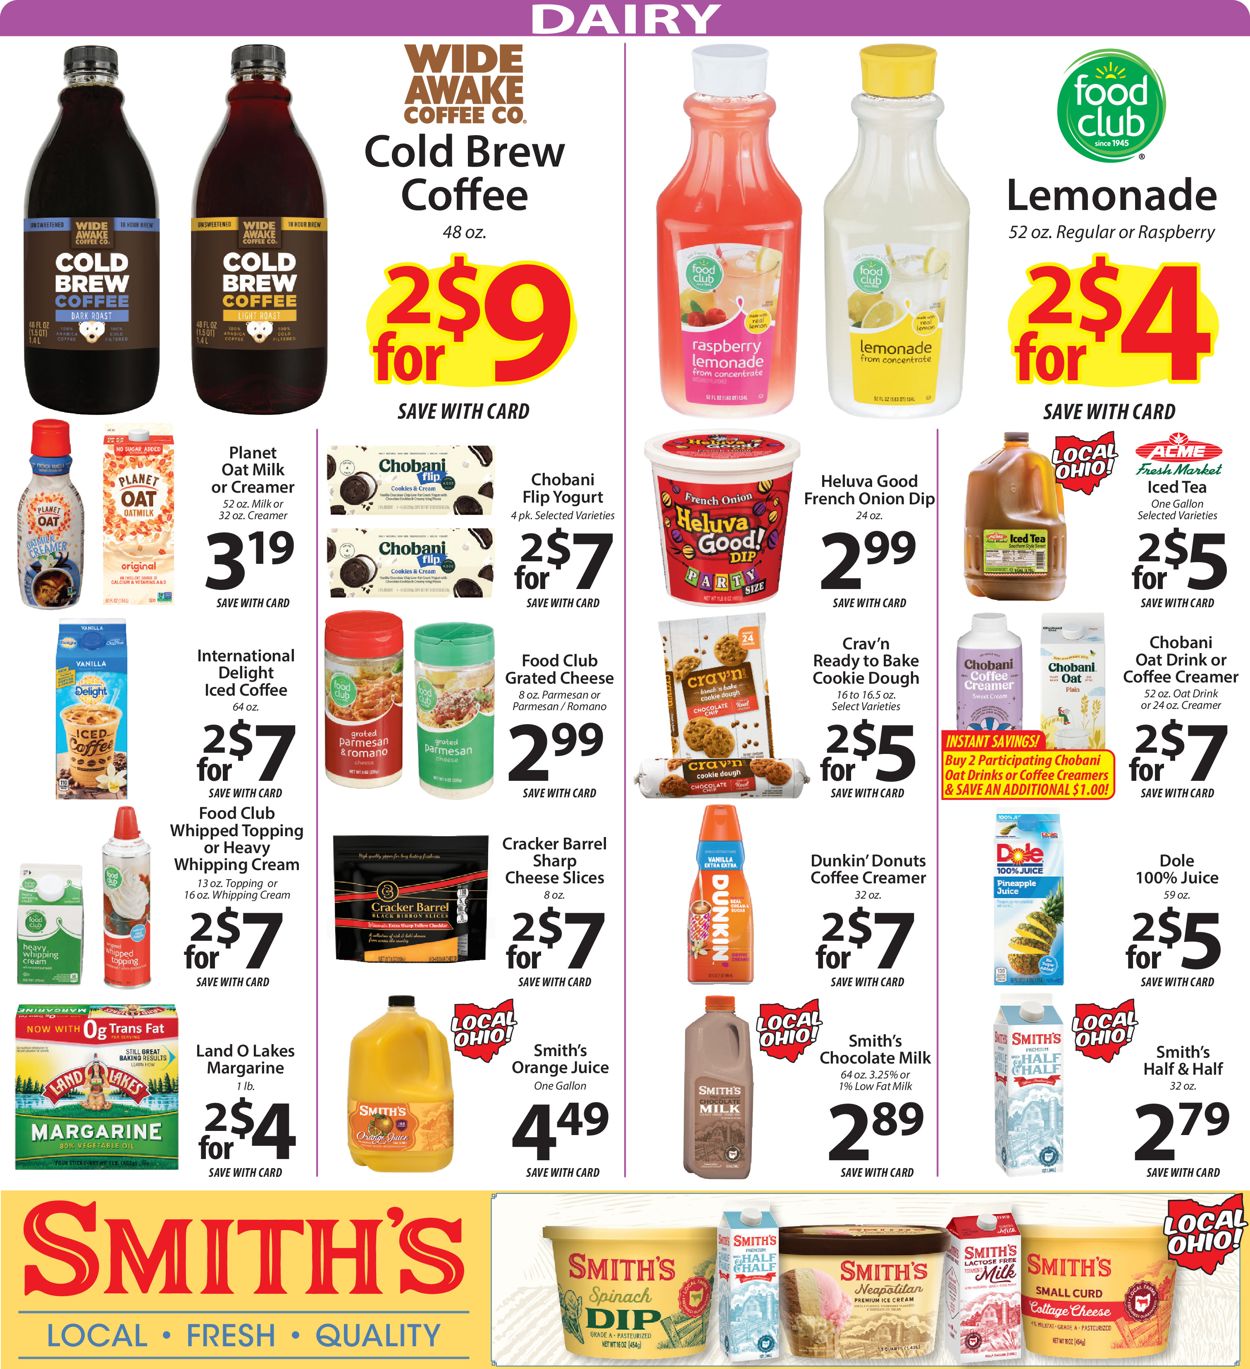 Acme Fresh Market Ad from 03/24/2022